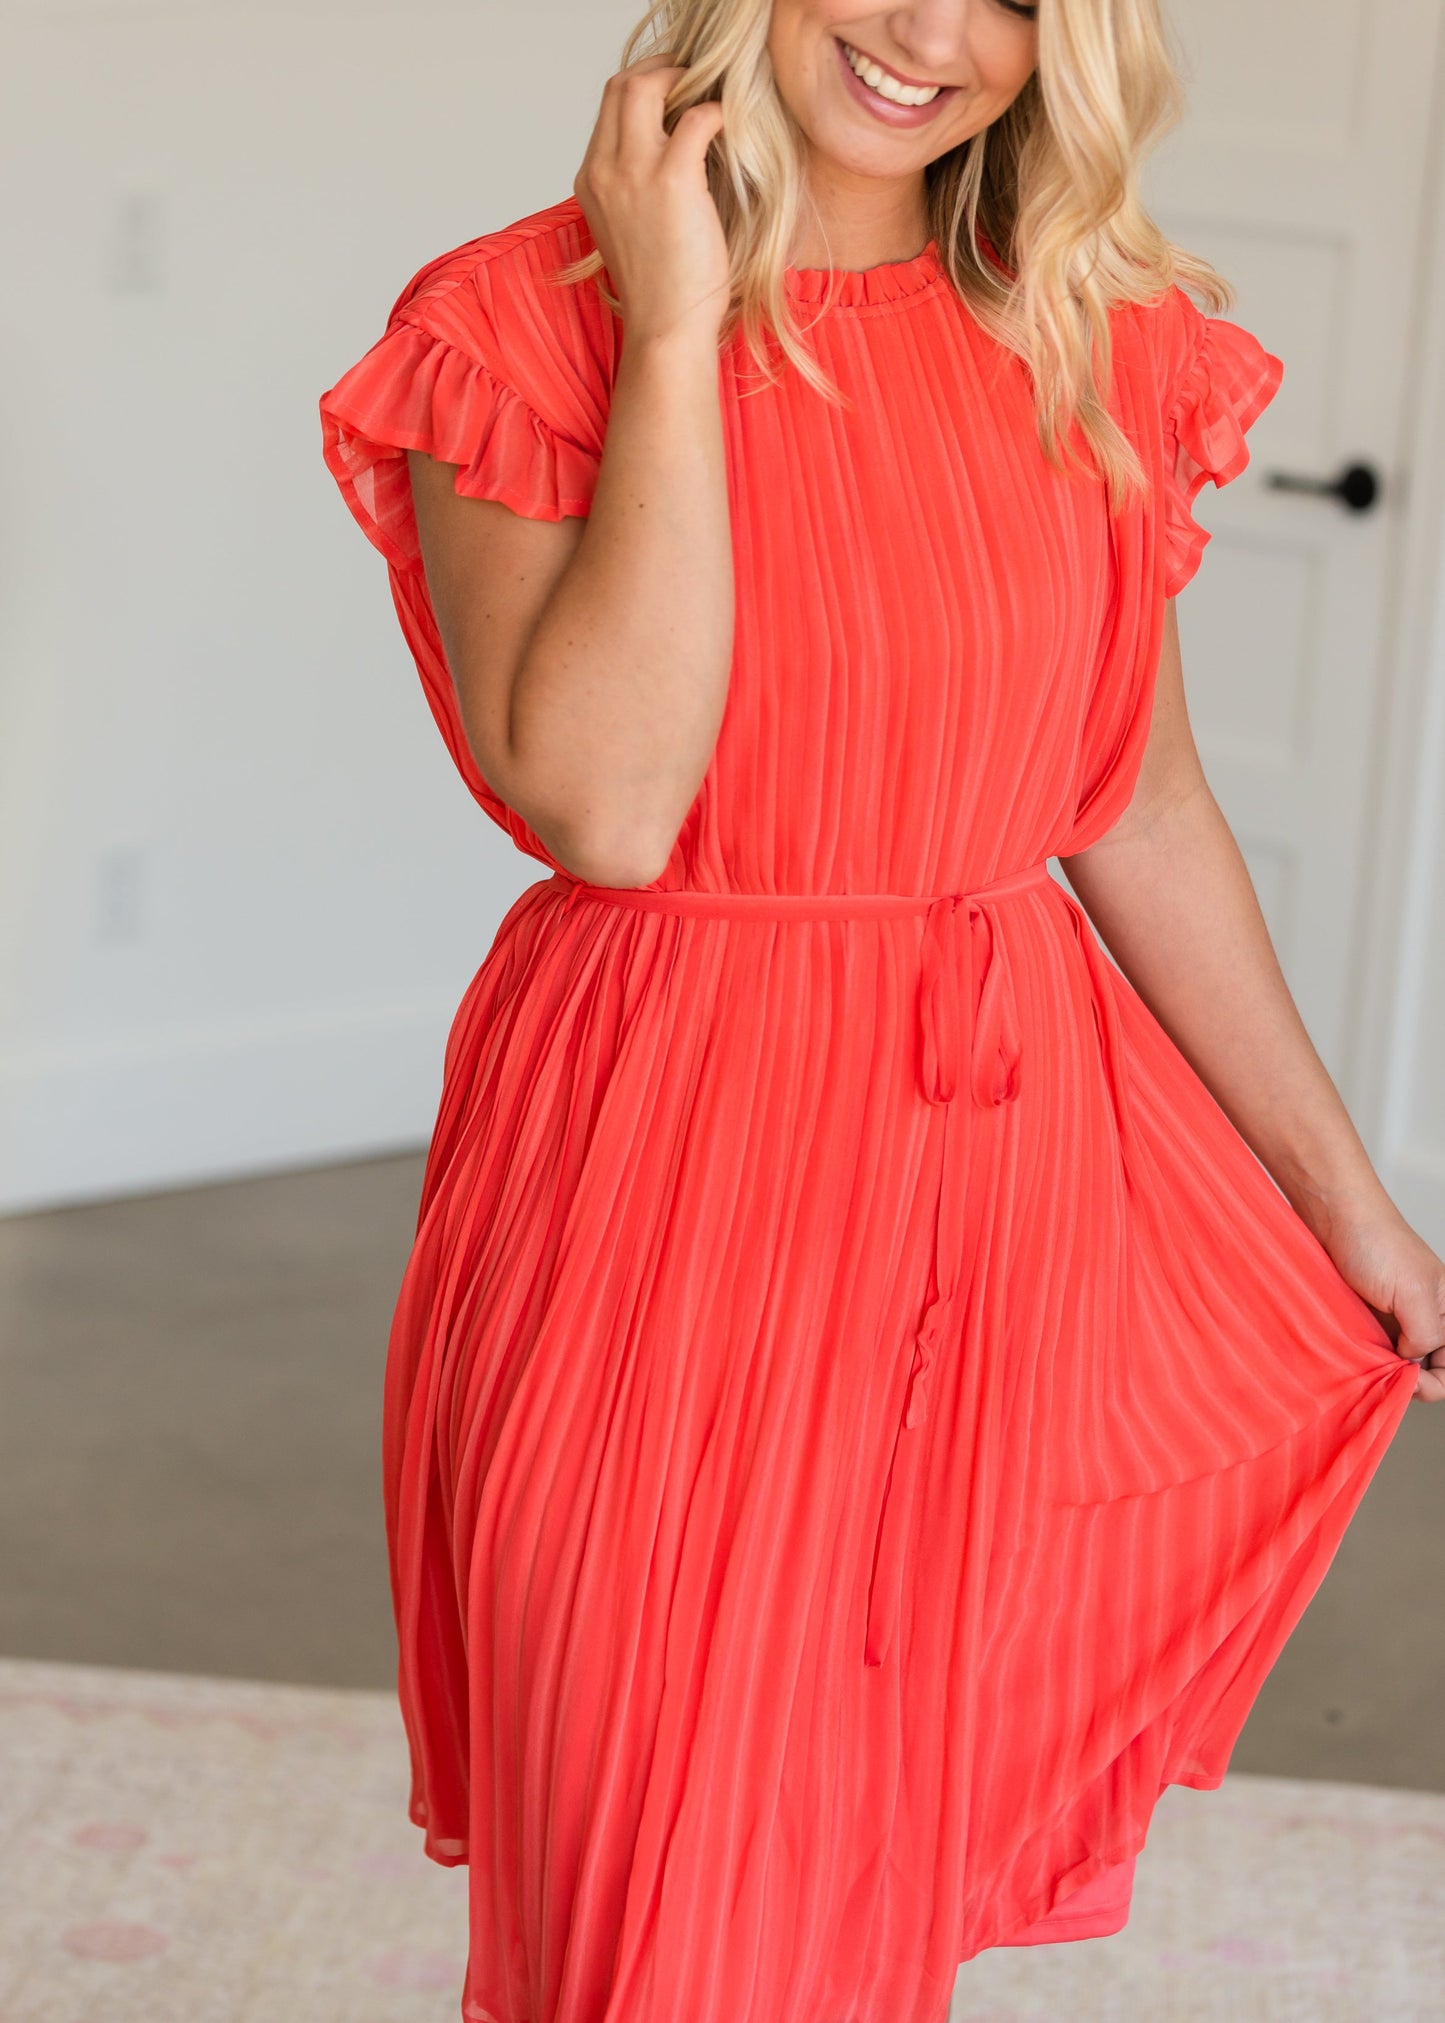 High Neck Pleated Belted Coral Midi Dress - FINAL SALE Dresses